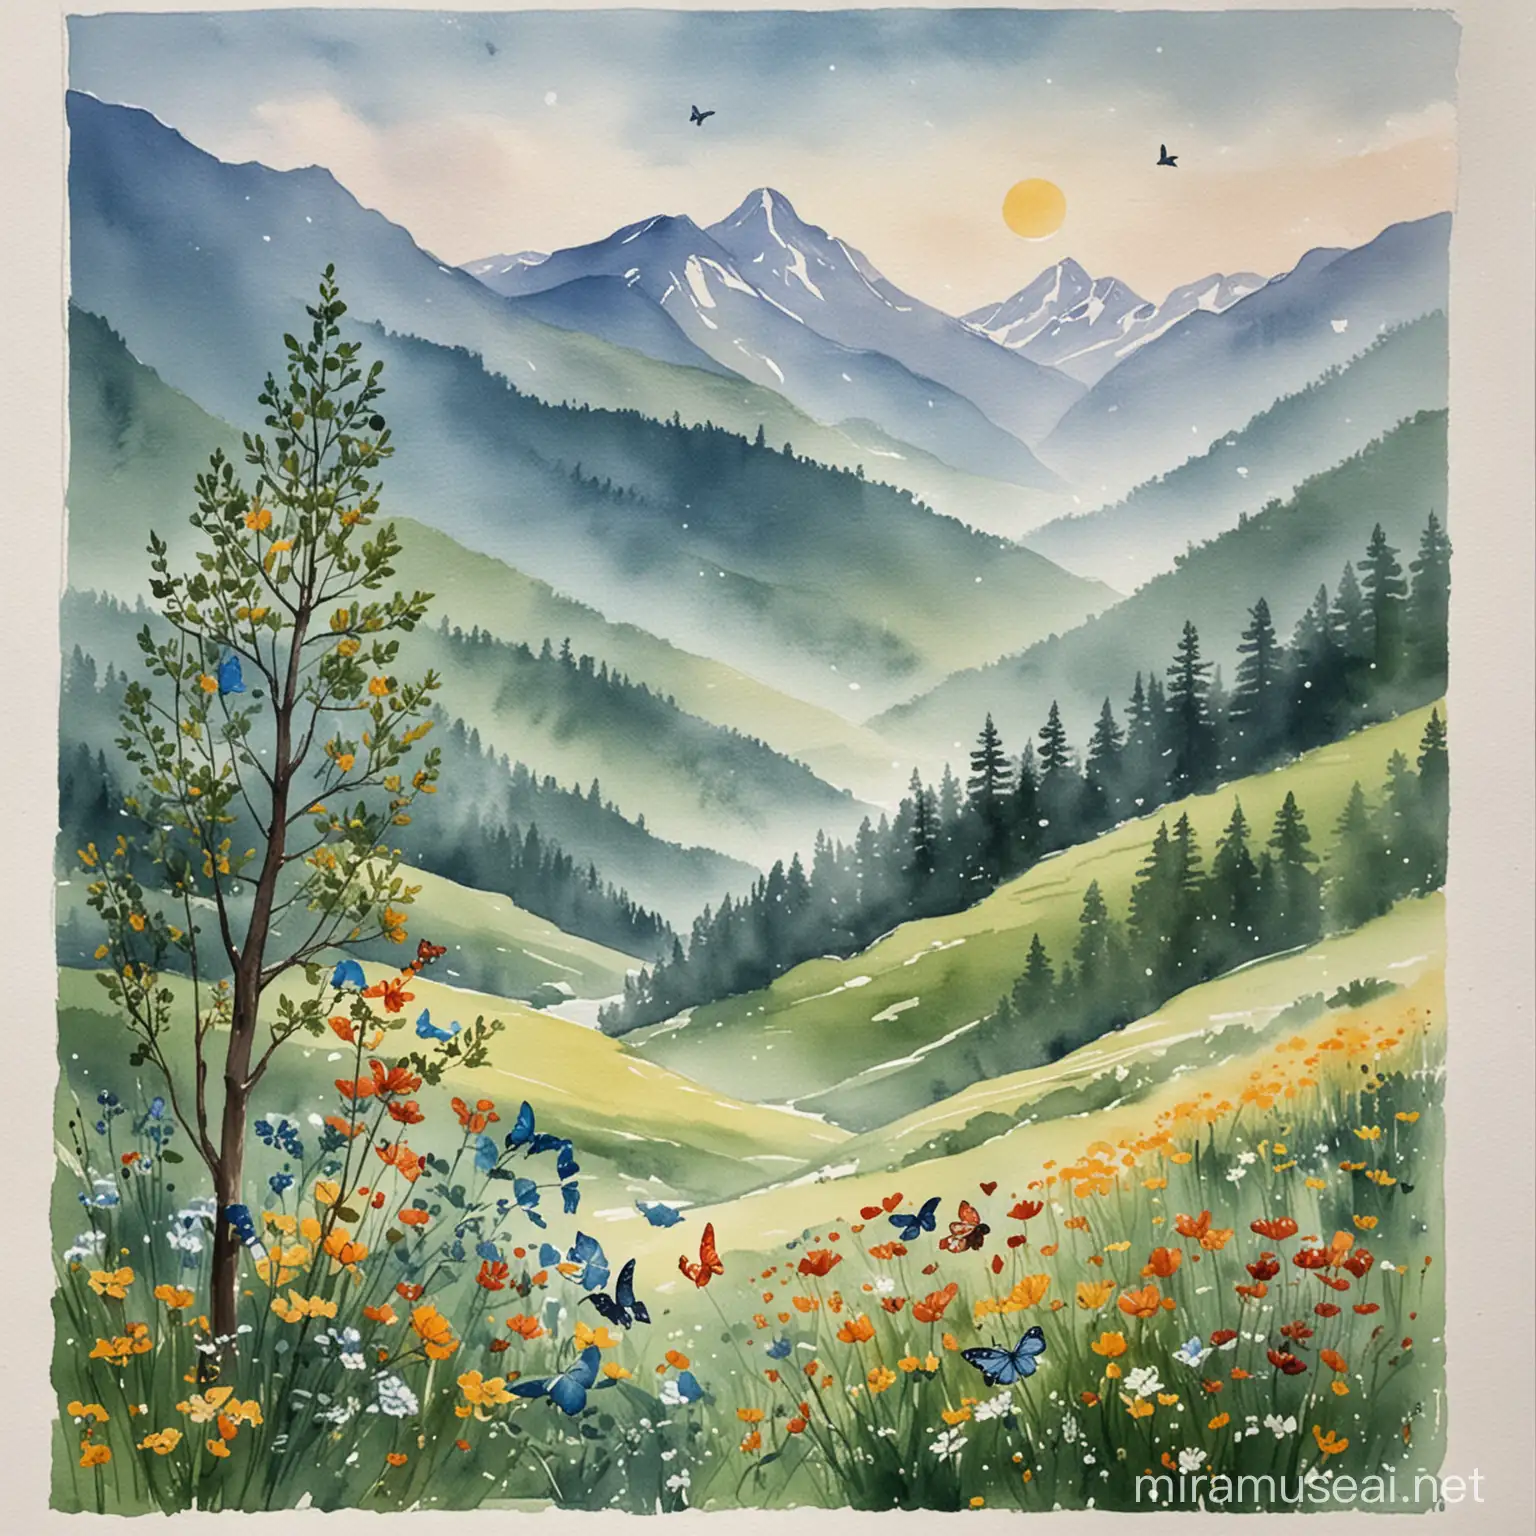 Tranquil Mountain Landscape with Butterflies and Sunshine